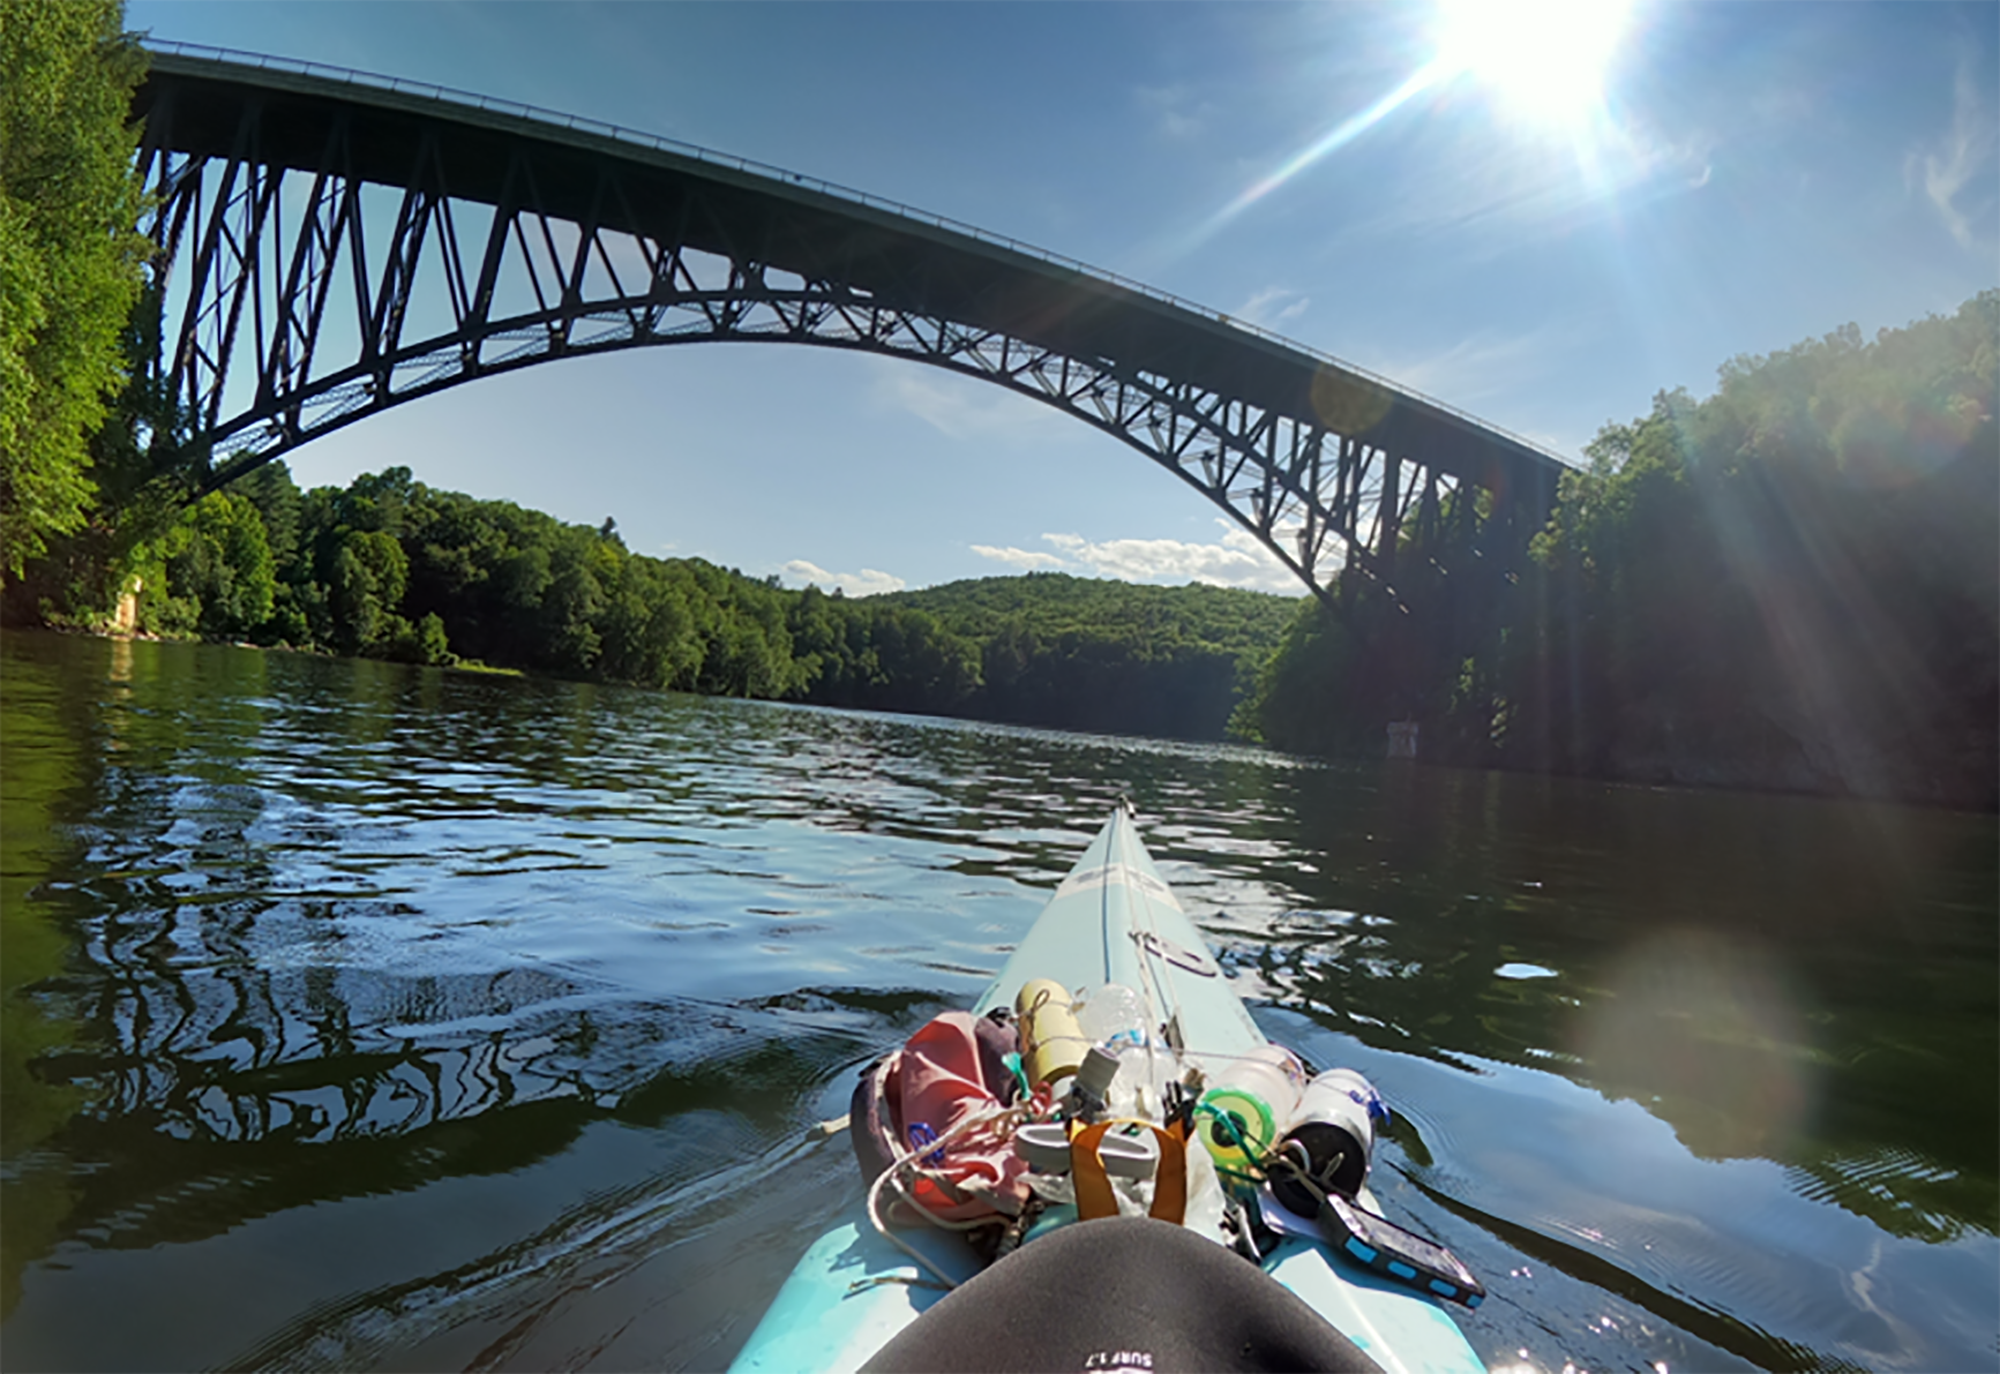 One New England Thread: An 800-mile bike and kayak trip through the  Northeast avoids automobiles